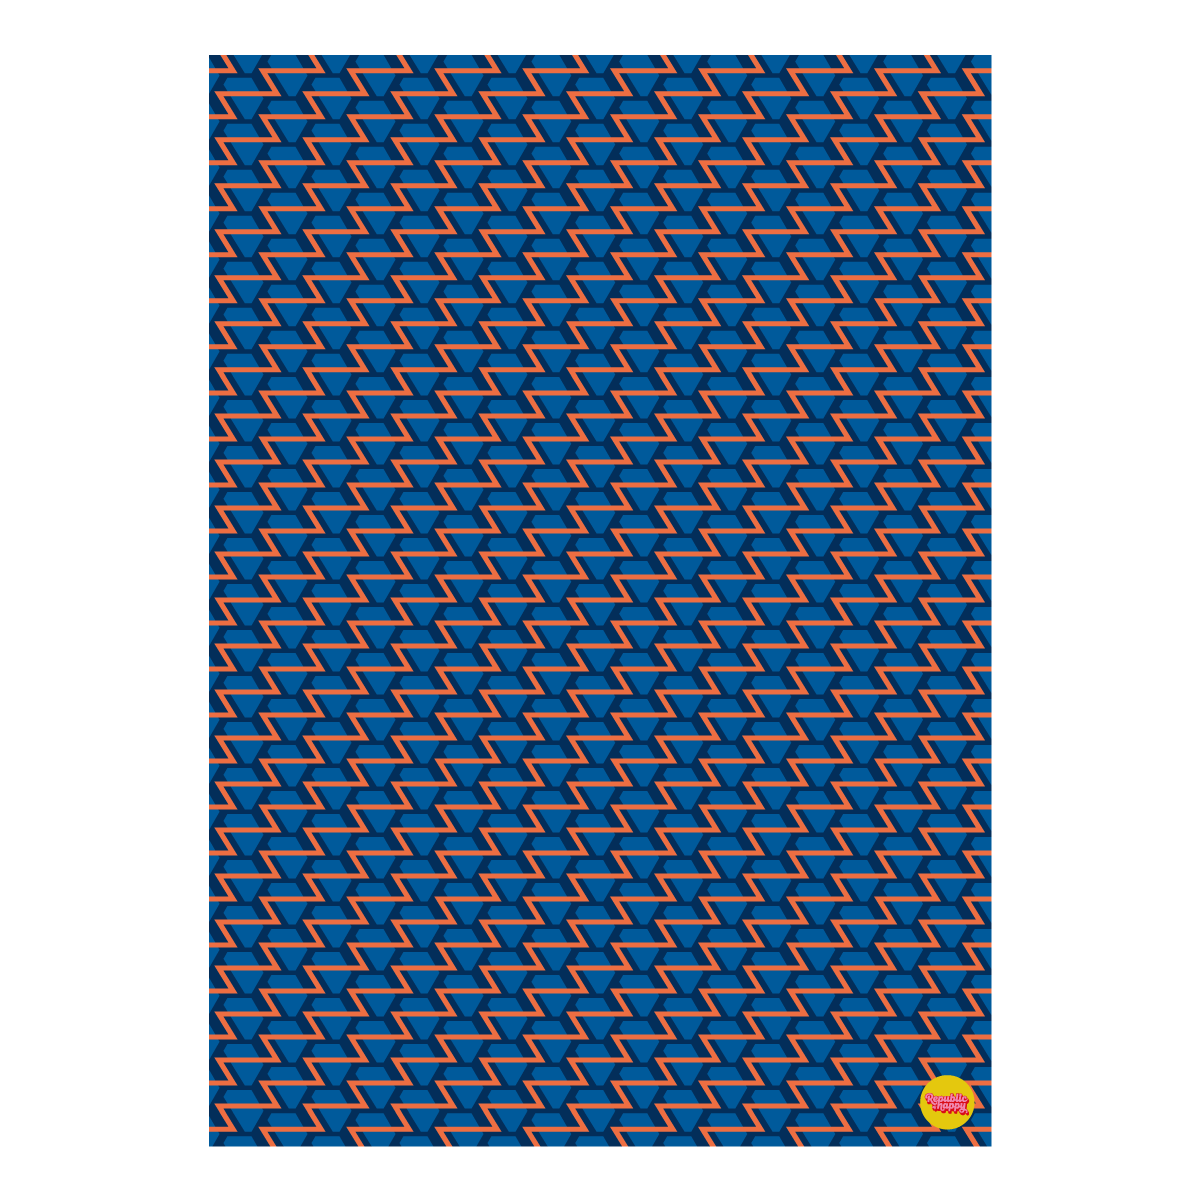 ZIGZAGS wrapping paper - Colourful gift wrap sheets (3, 6 or 12)